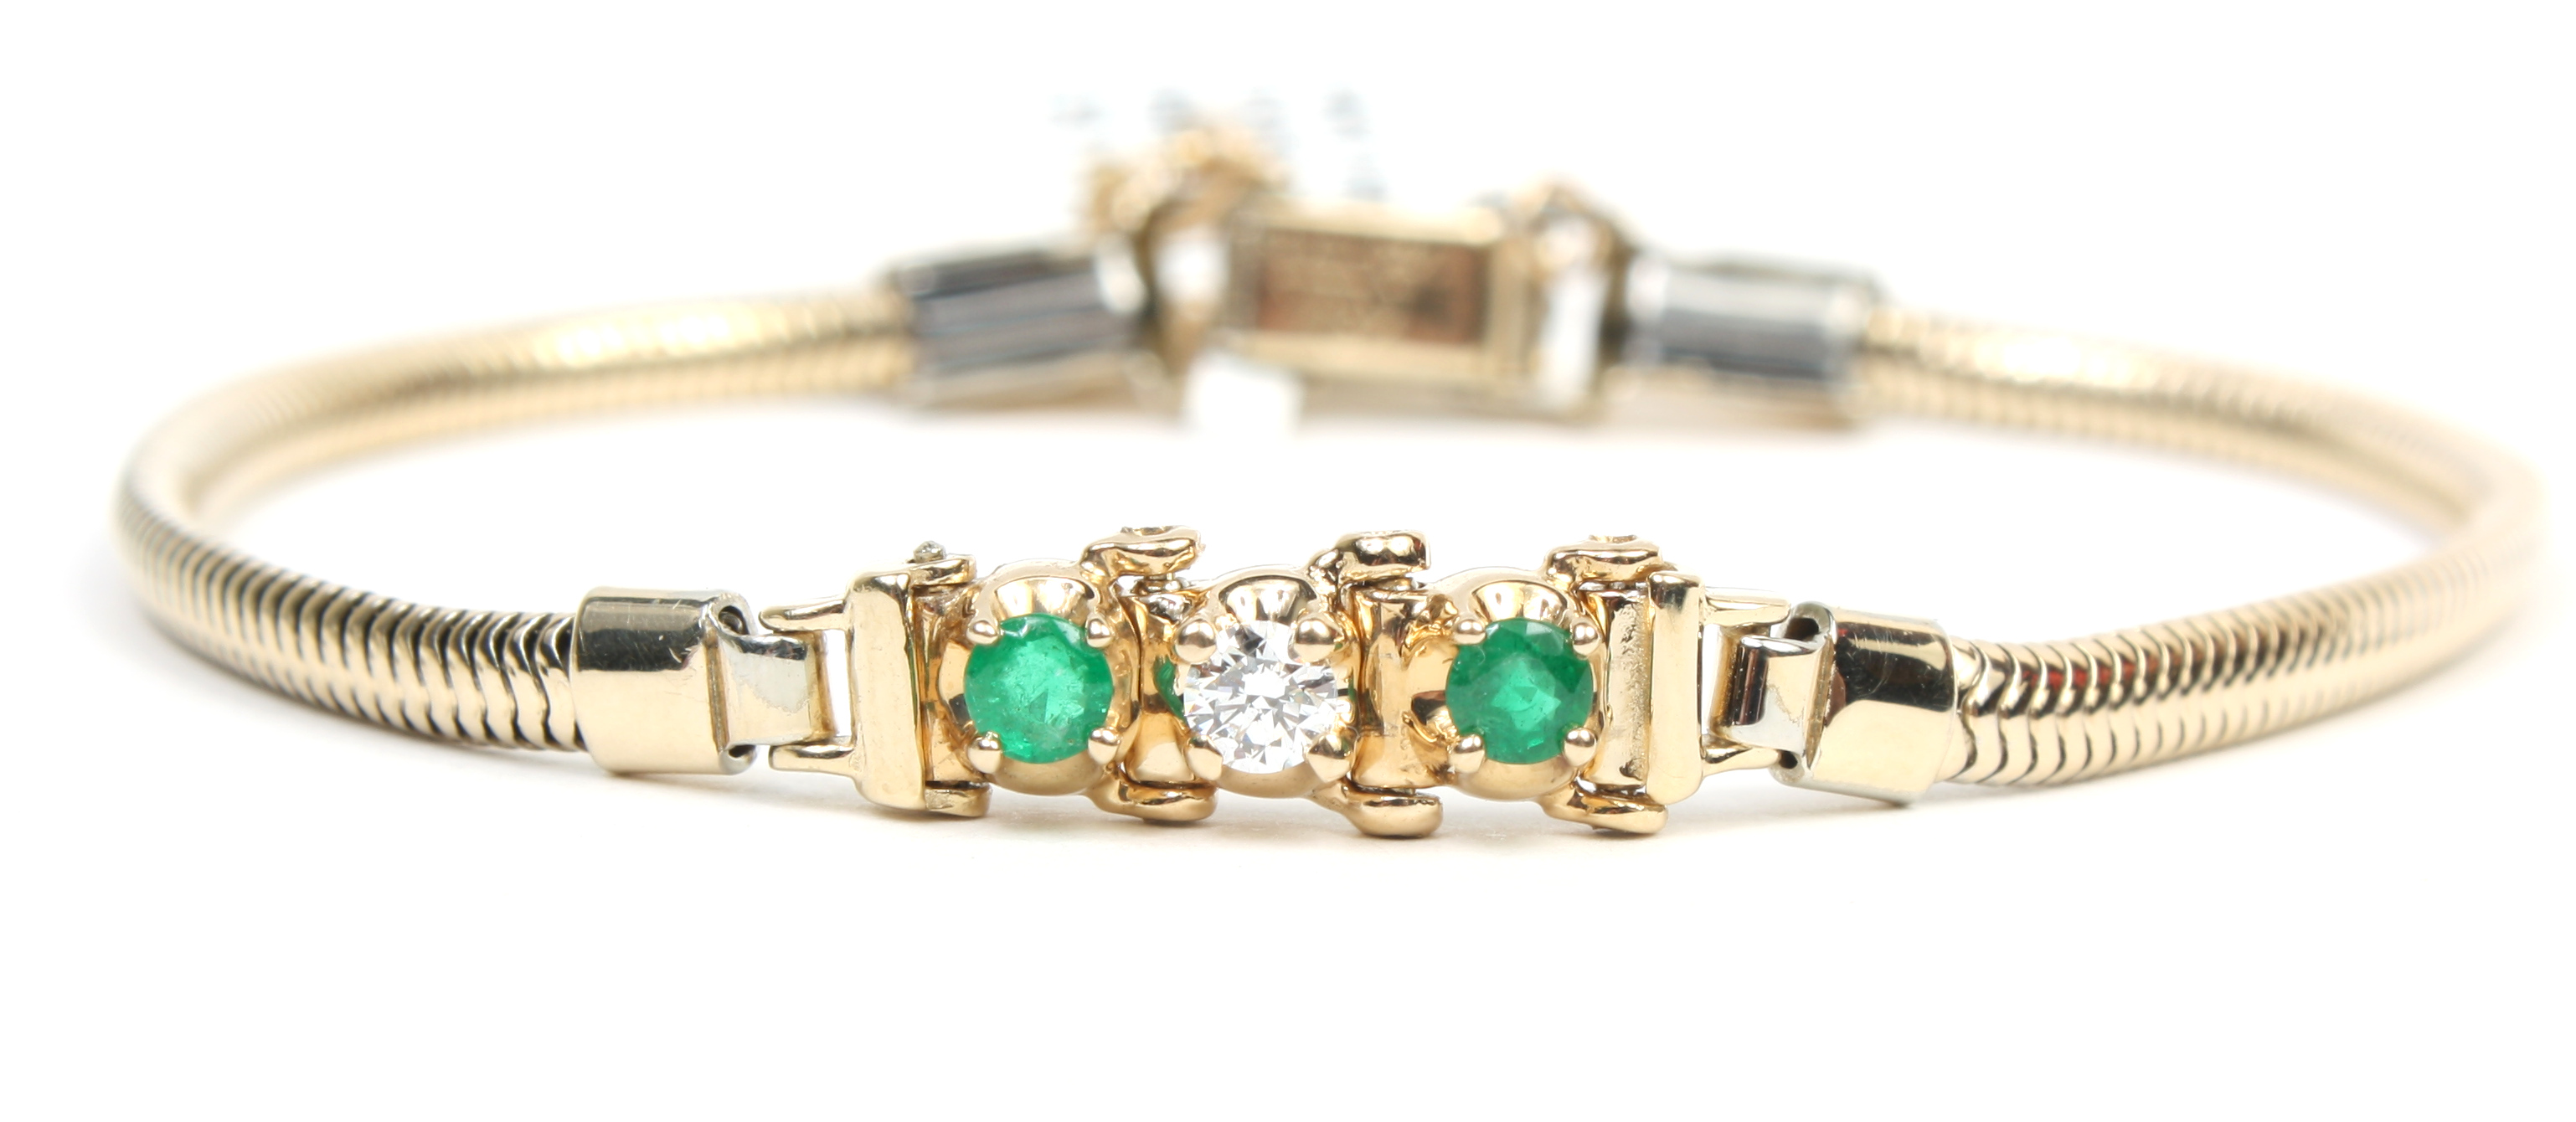 Anthony Women's Bracelet - Add a Wild Touch to Your Style – Swashaa